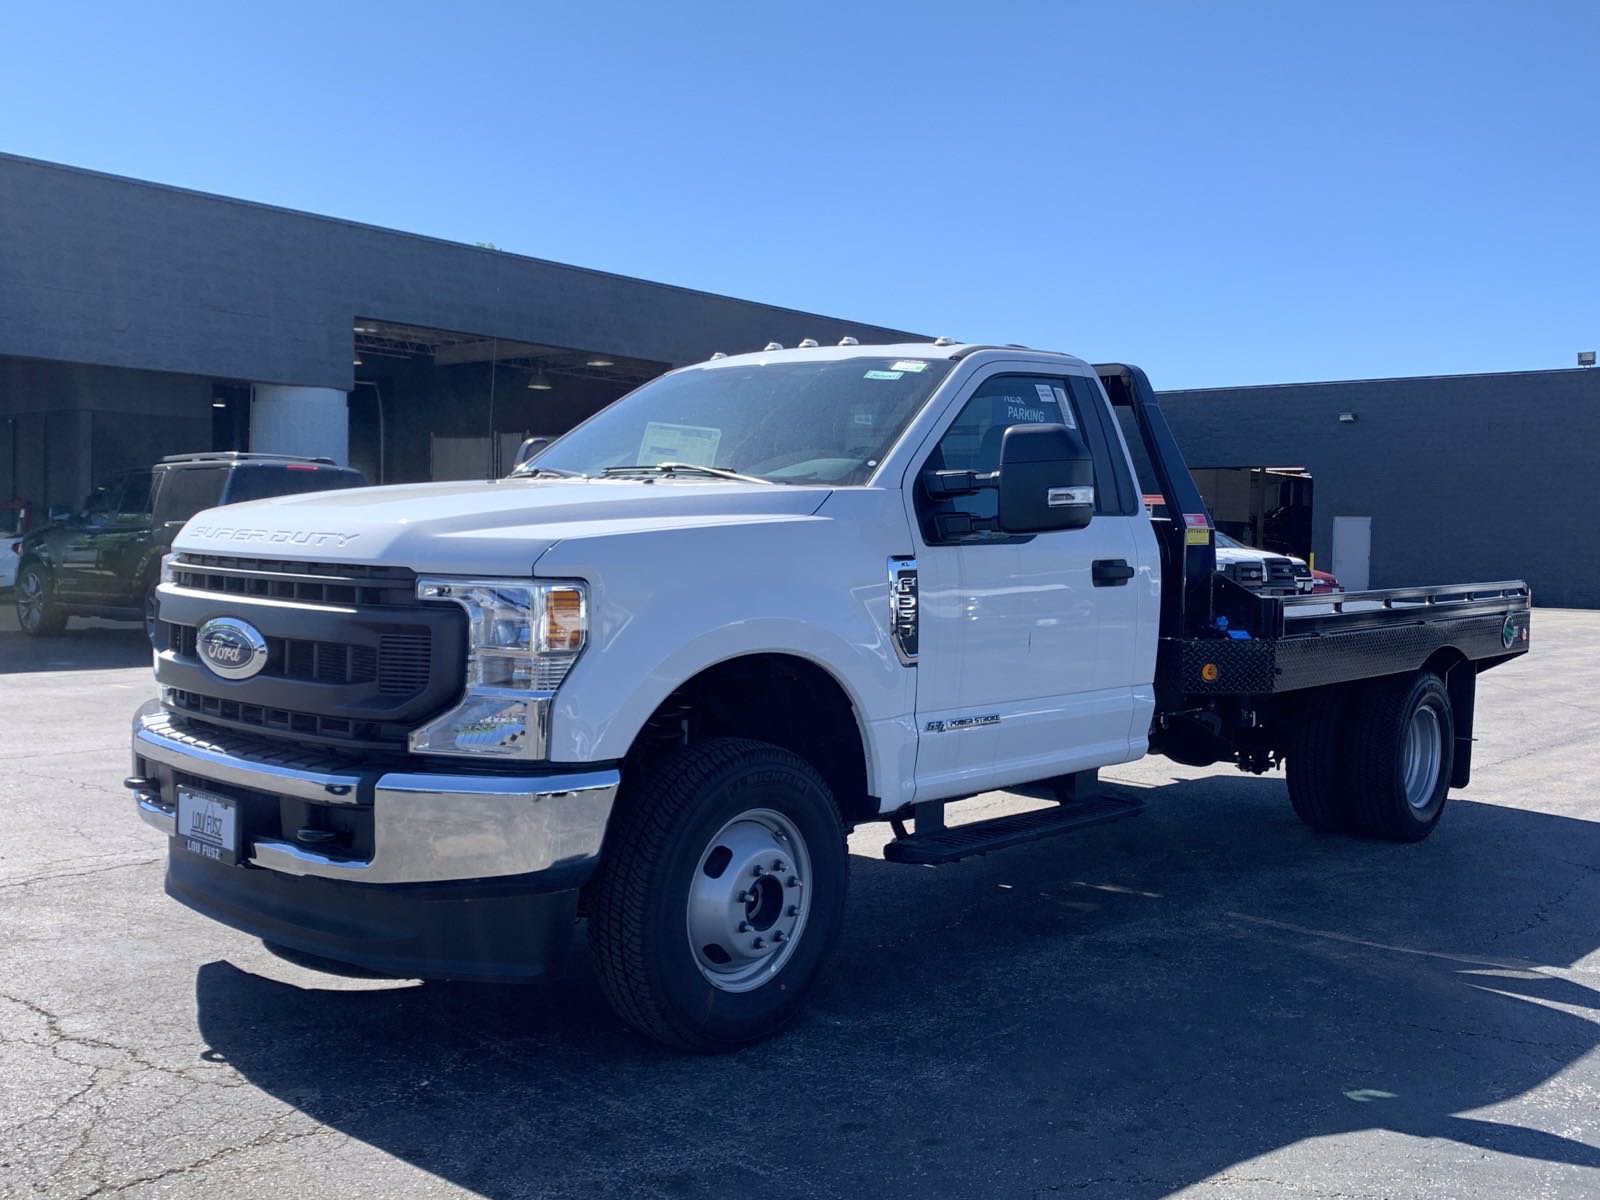 New 2020 Ford Super Duty F350 DRW XL 4WD Regular Cab ChassisCab